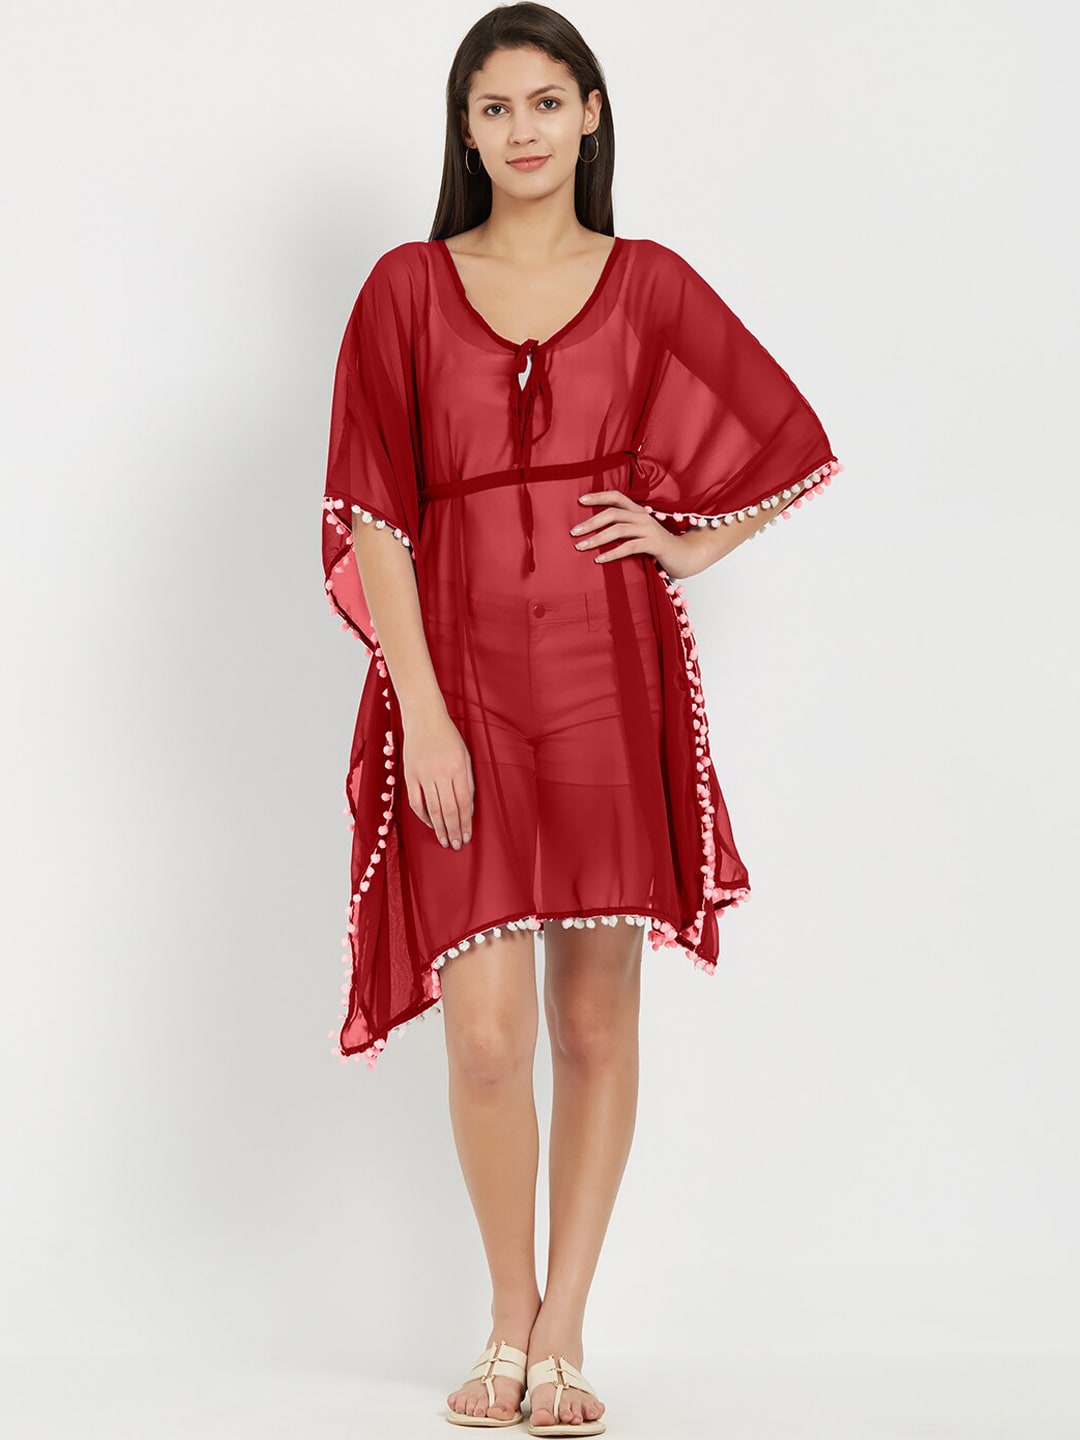 MIRCHI FASHION Women Red Solid Cover Up Kaftan Dress Price in India